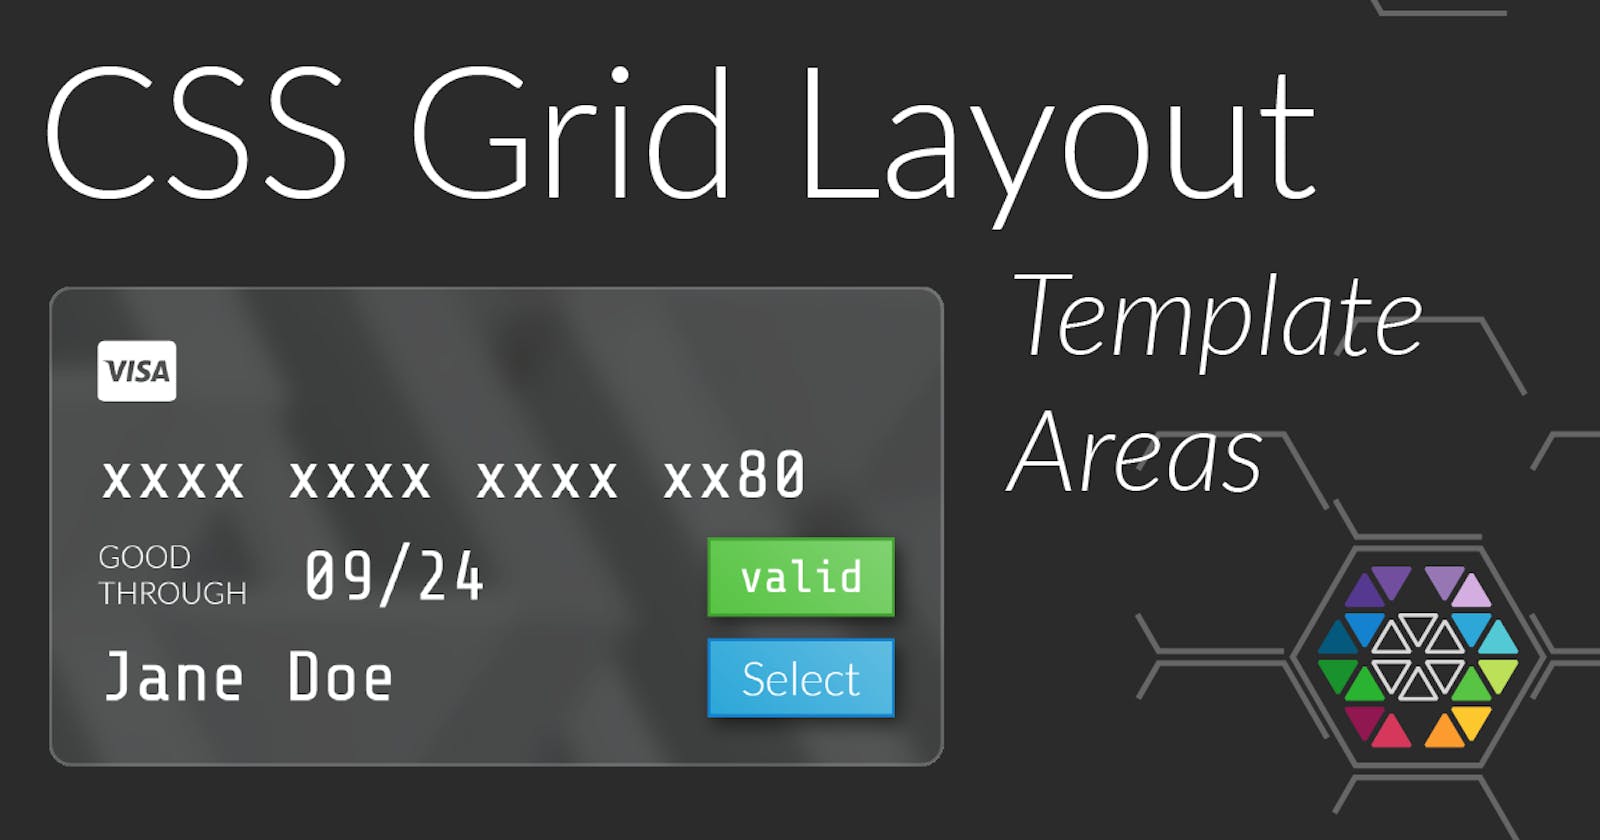 CSS Grid Layout Template Areas (Secrets of Painless Layout)